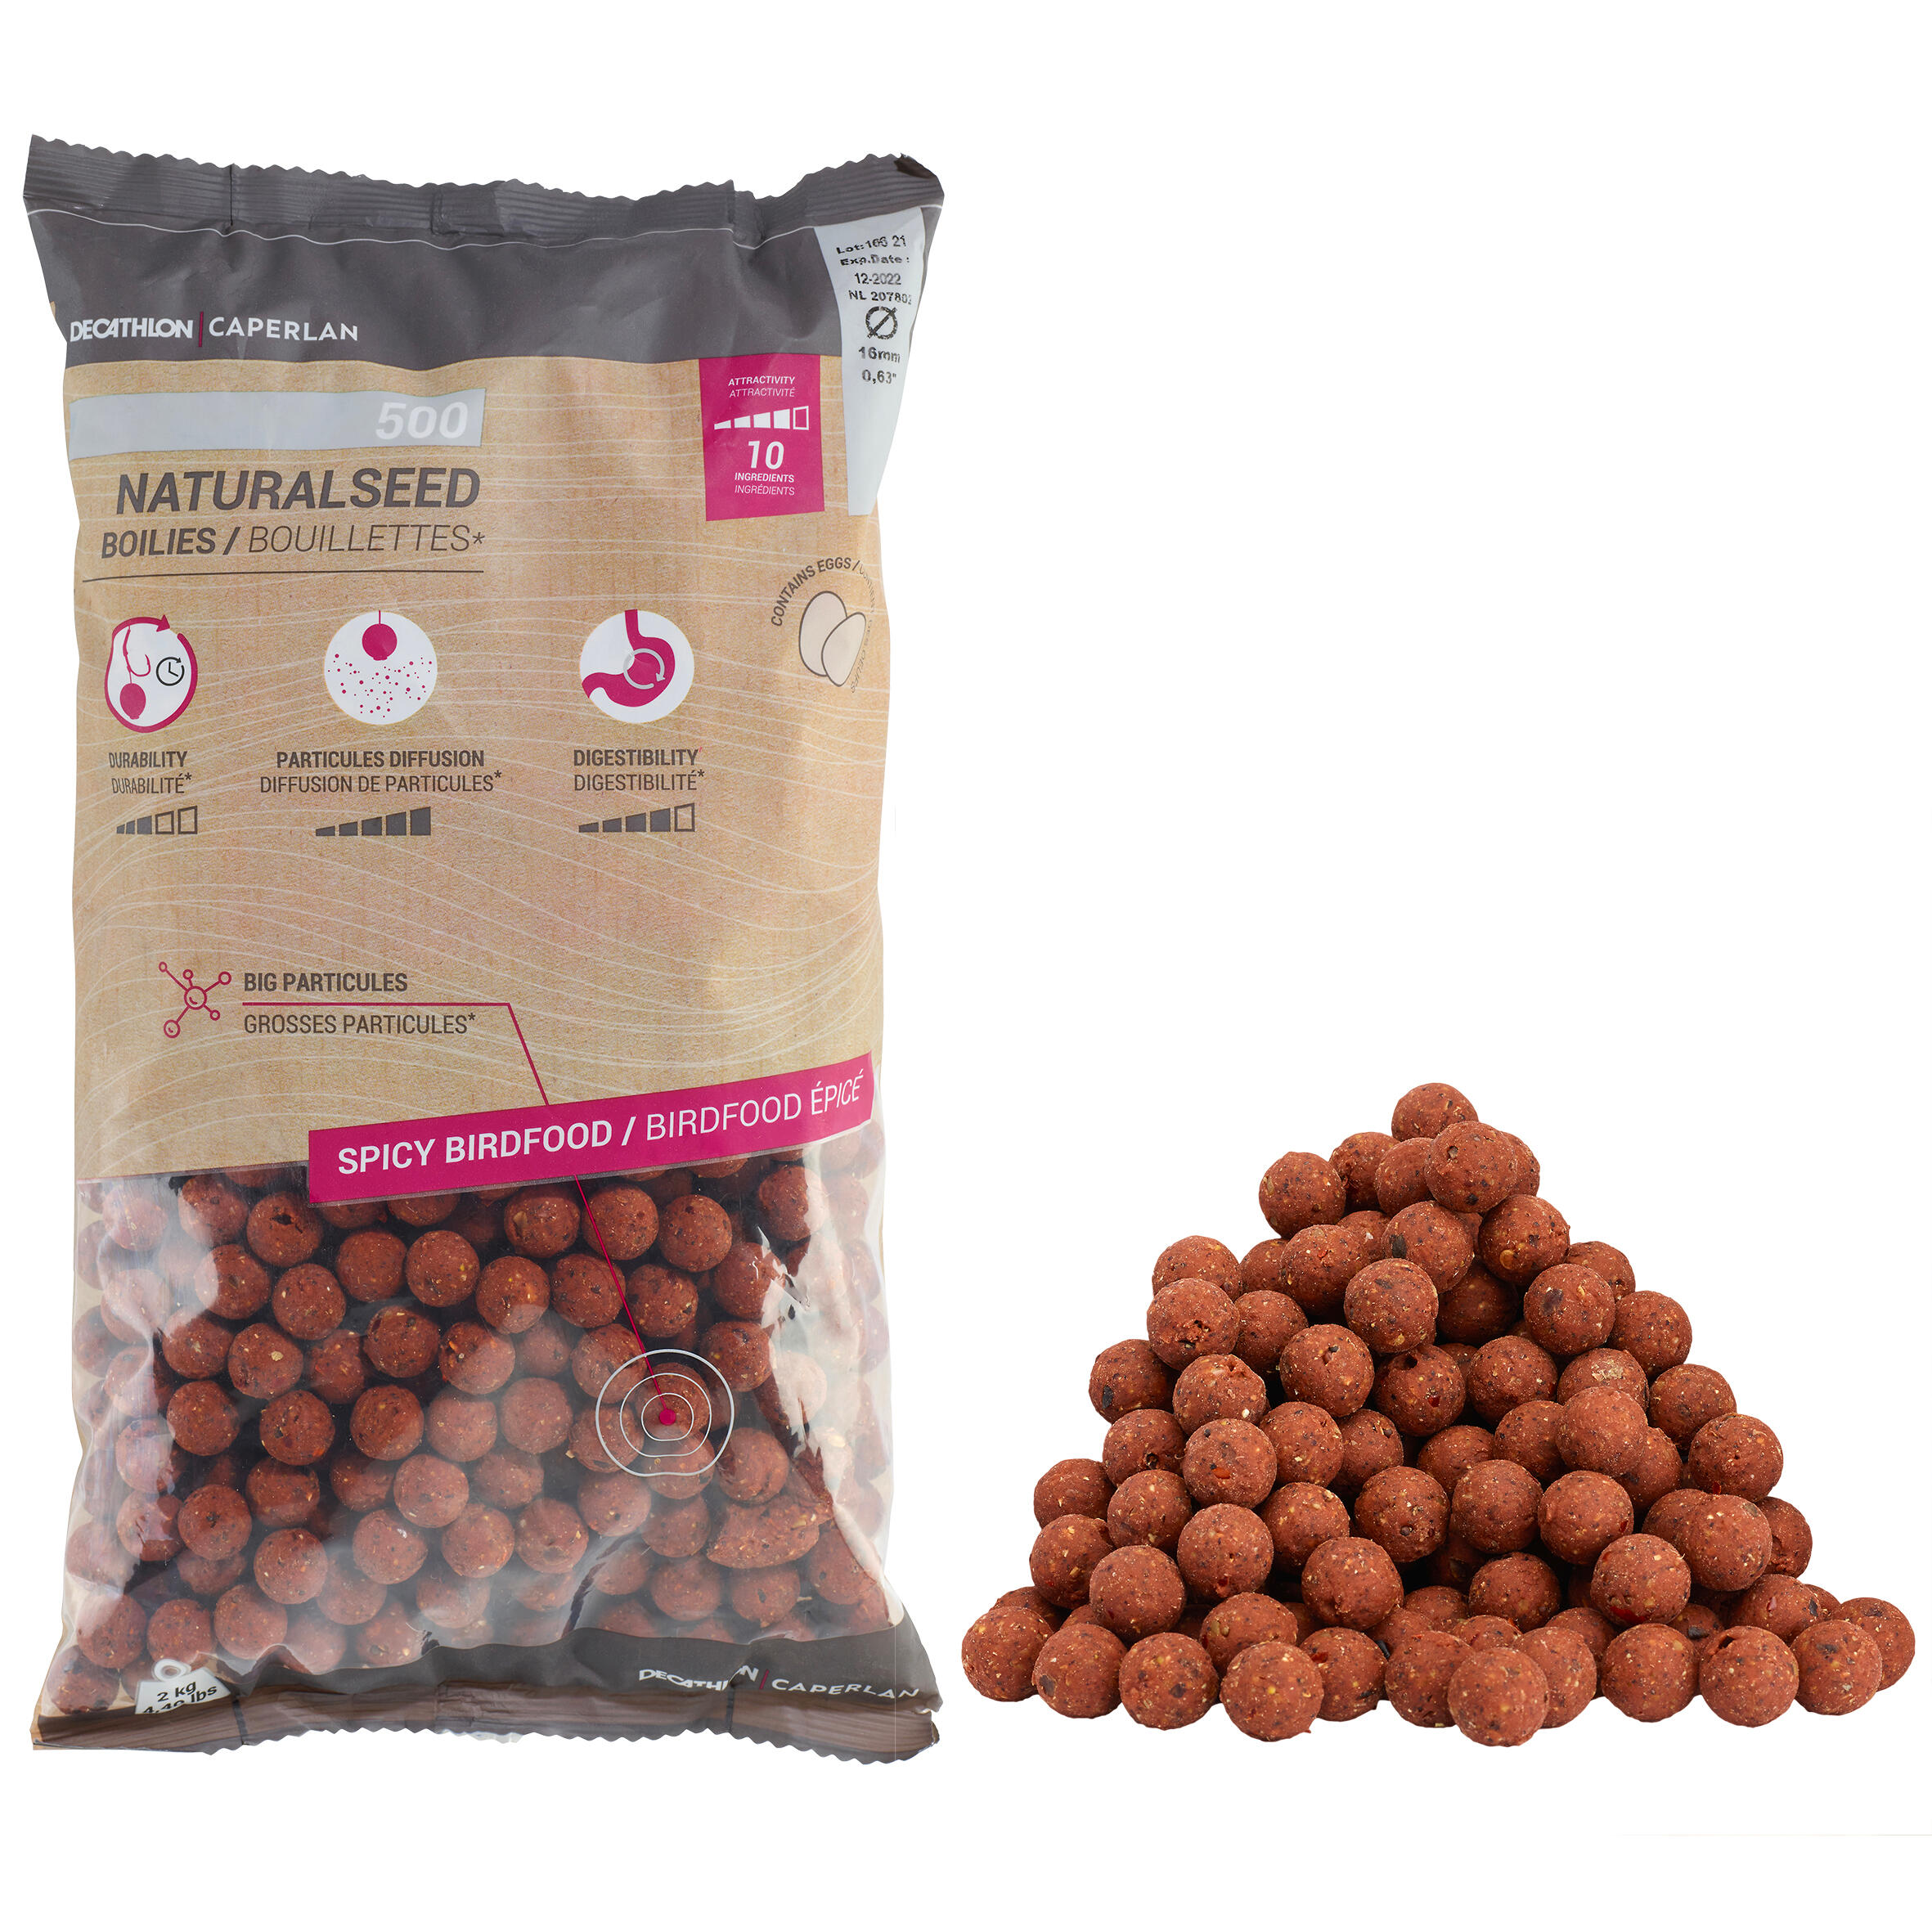 CAPERLAN Carp Fishing Boilies NATURALSEED 16 mm 2 kg - Spicy Birdfood